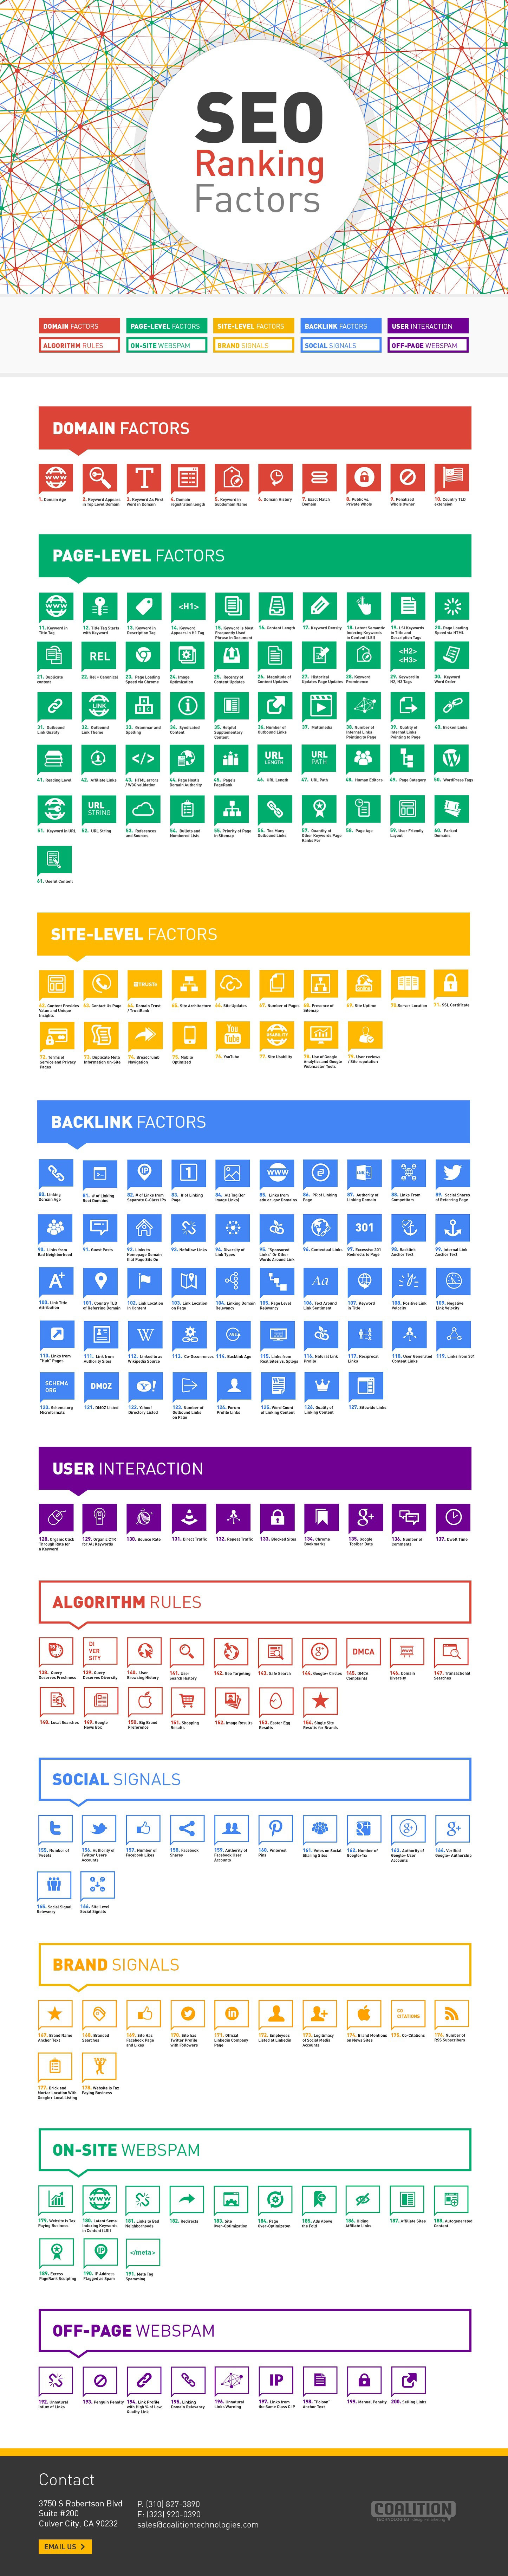 Factors That Affect SEO Rankings - Infographic